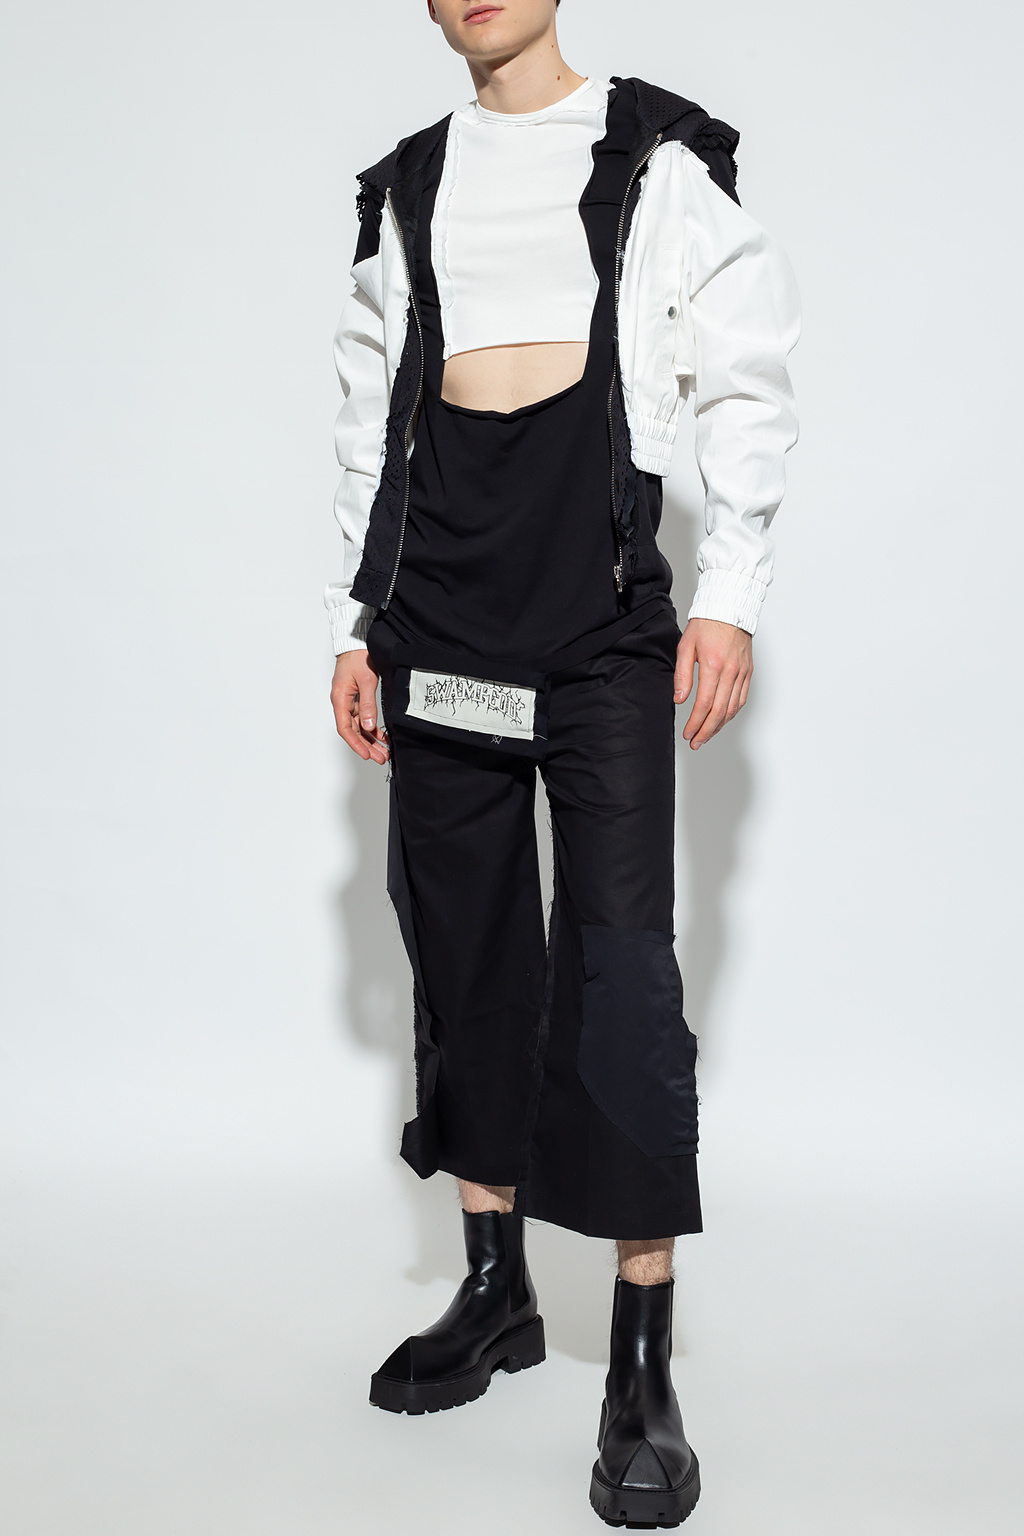 Rick Owens ‘Exclusive for SneakersbeShops’ Pepe trousers